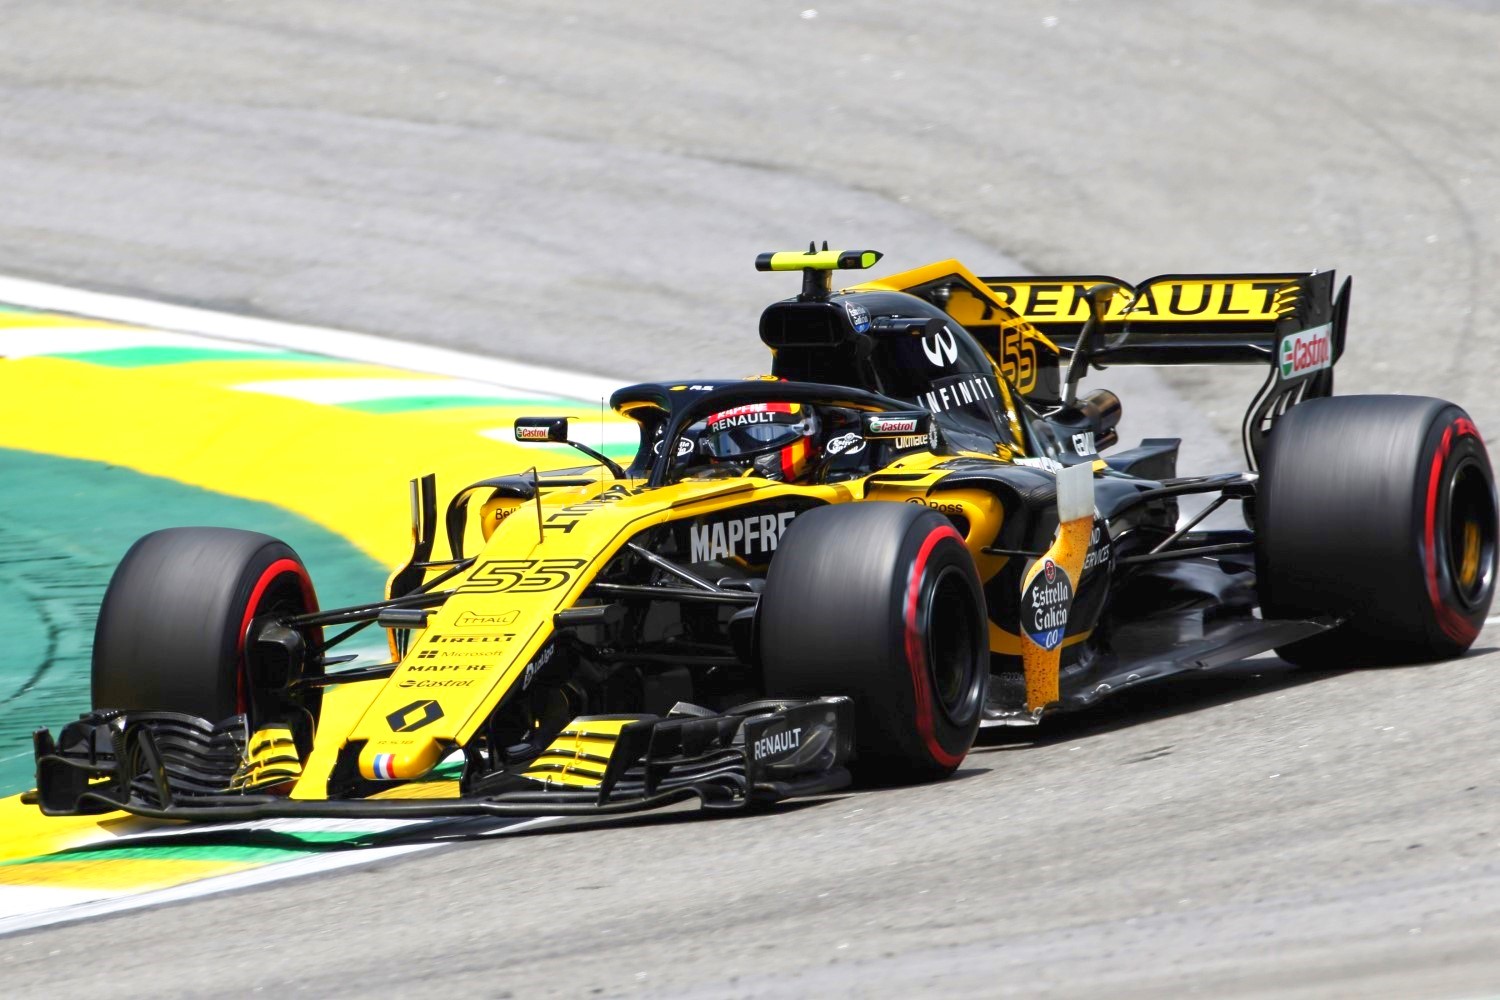 Can Renault be fast enough in 2019 to get a podium?